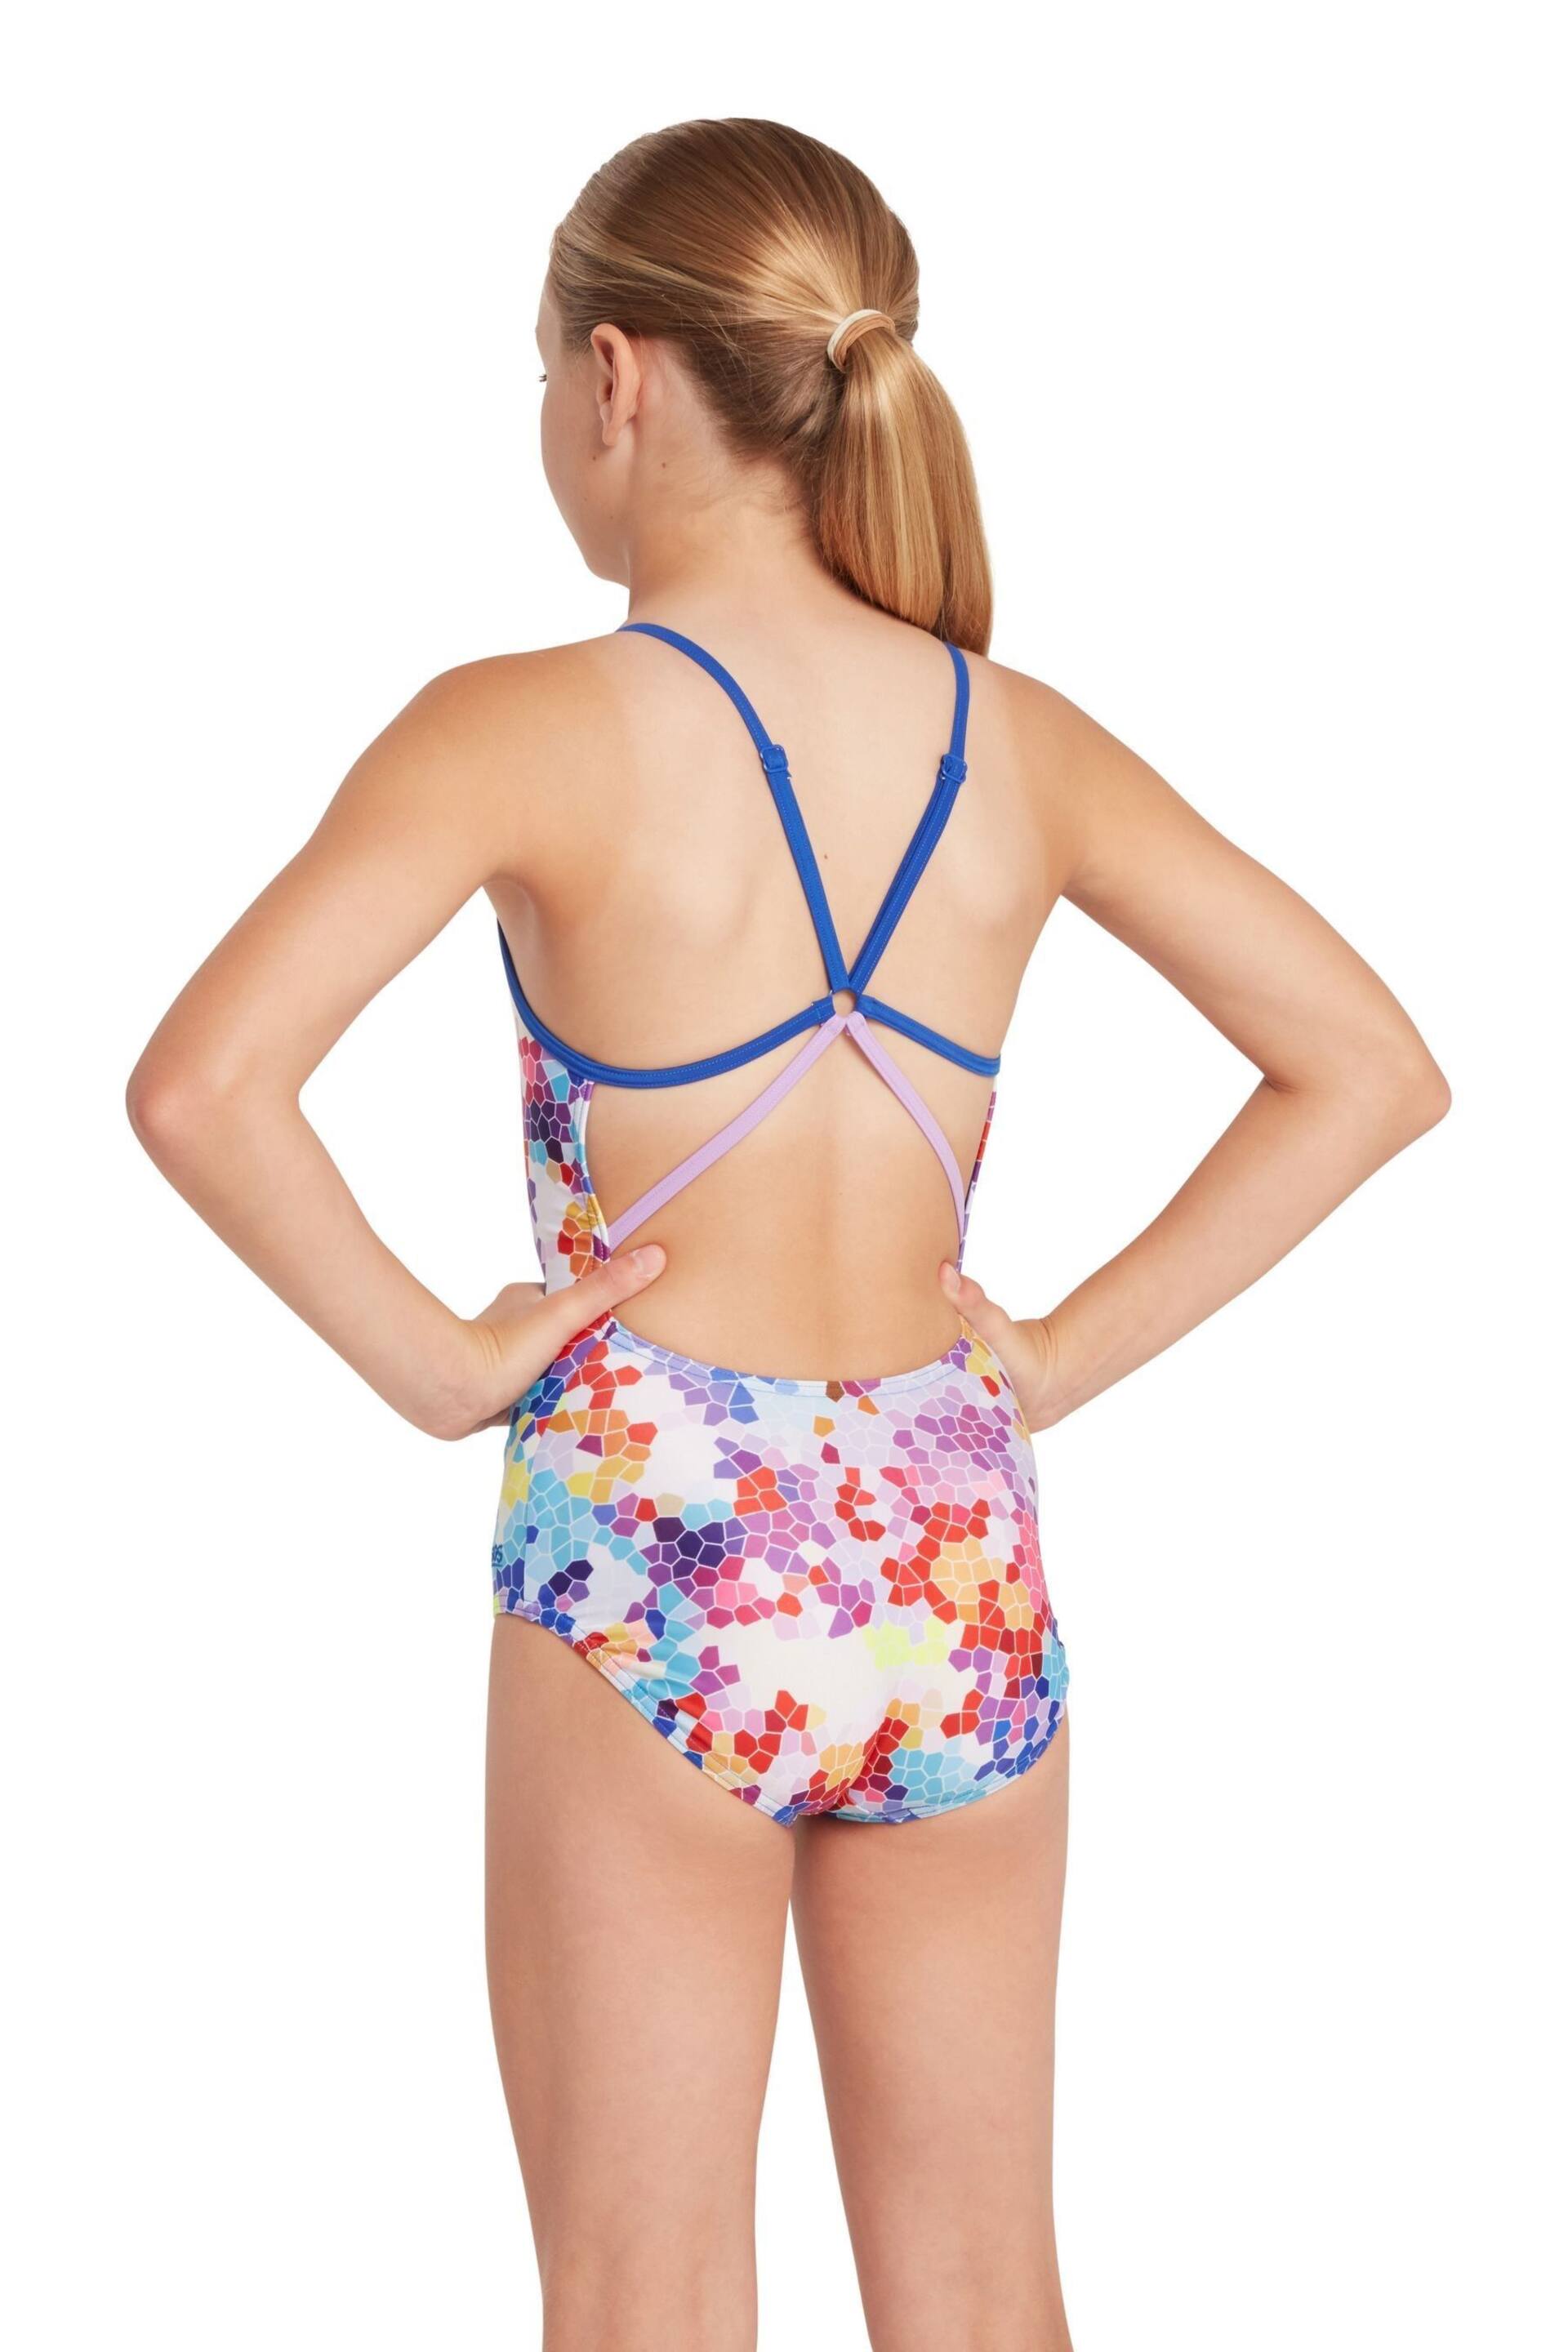 Zoggs Girls Starback One Piece Swimsuit - Image 2 of 5